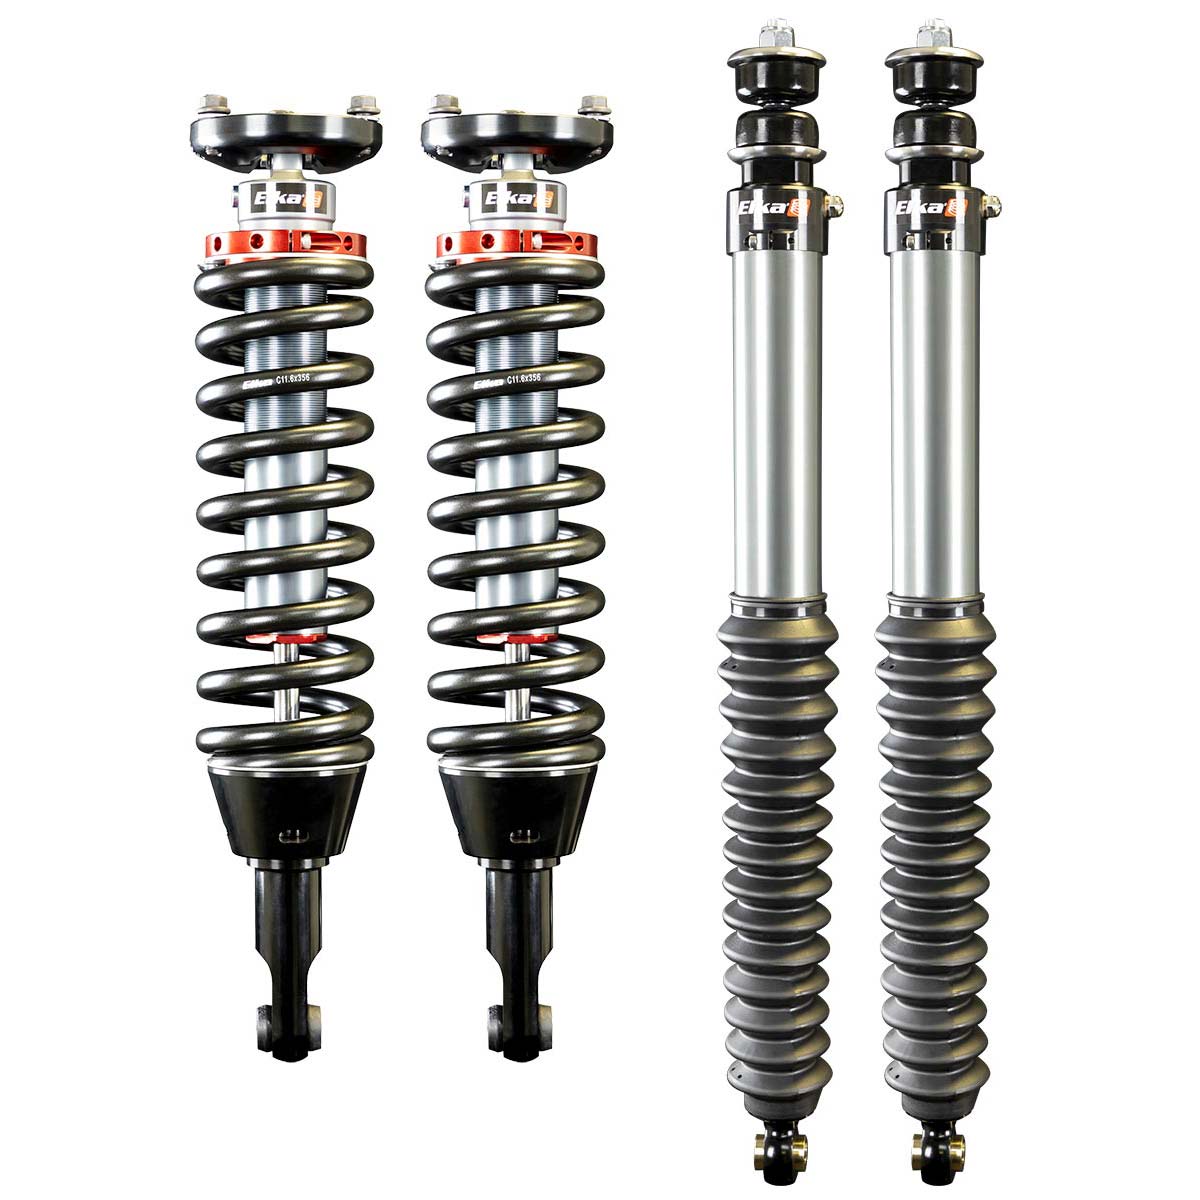 2.0 IFP FRONT & REAR SHOCKS KIT for TOYOTA 4RUNNER, 2010 to 2022 (0 in. to 3 in. lift) - RA Motorsports Canada